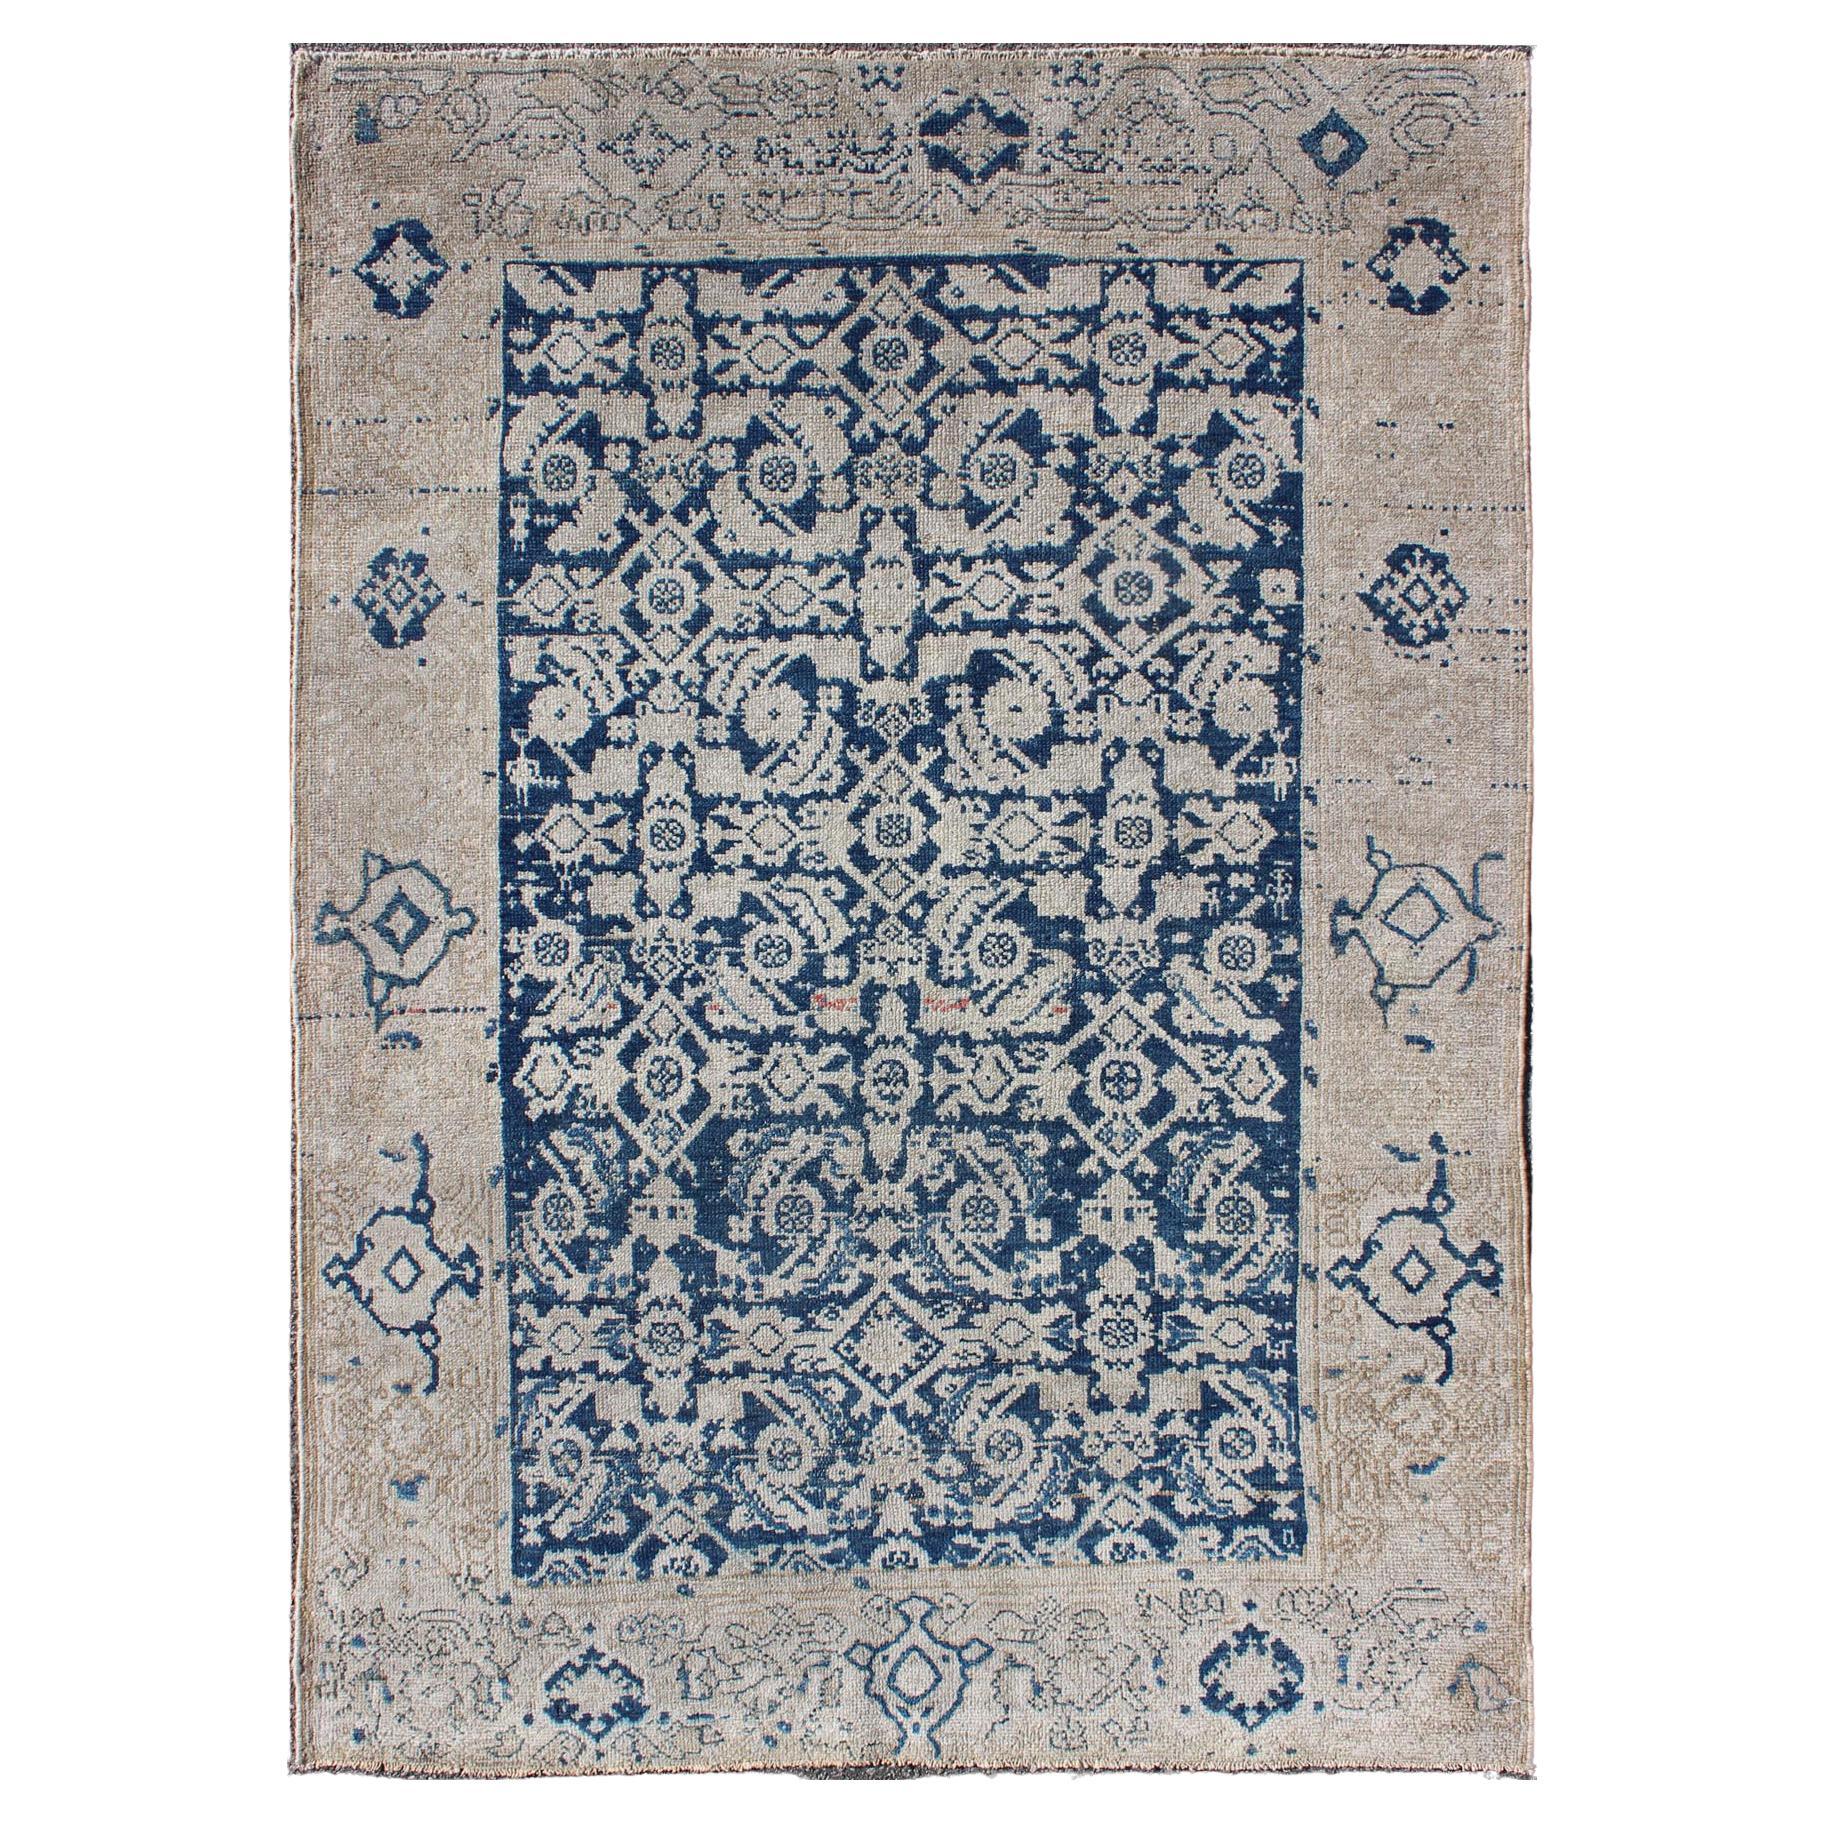  Antique Persian Distressed Malayer Rug with All-Over Herati Design in Navy Blue For Sale